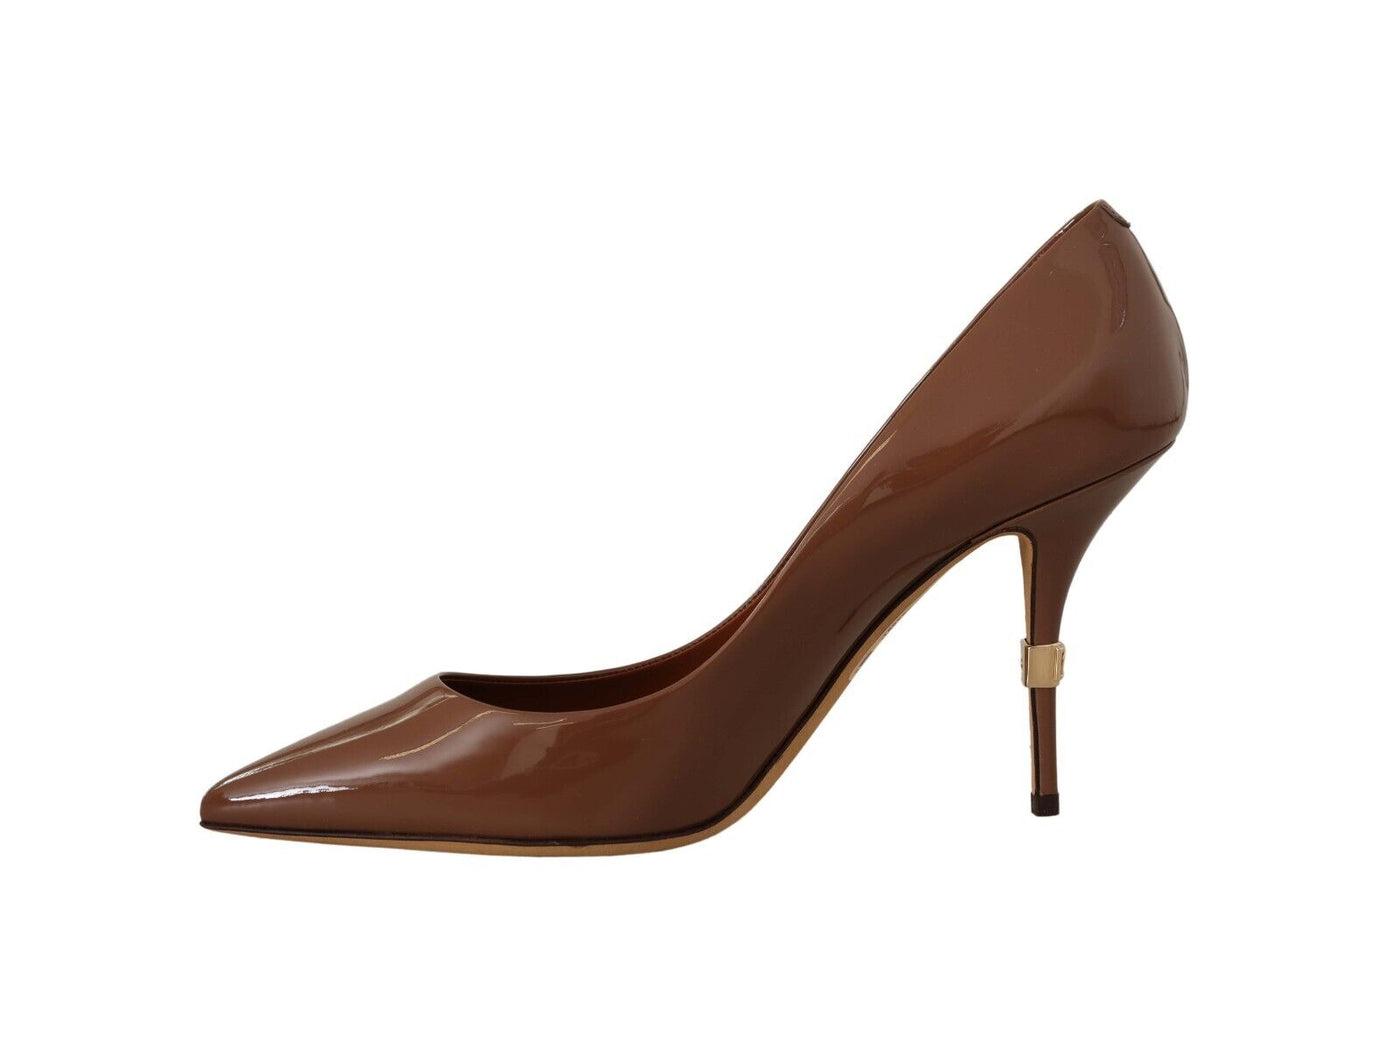 Brown Patent Leather High Heels Pumps Shoes